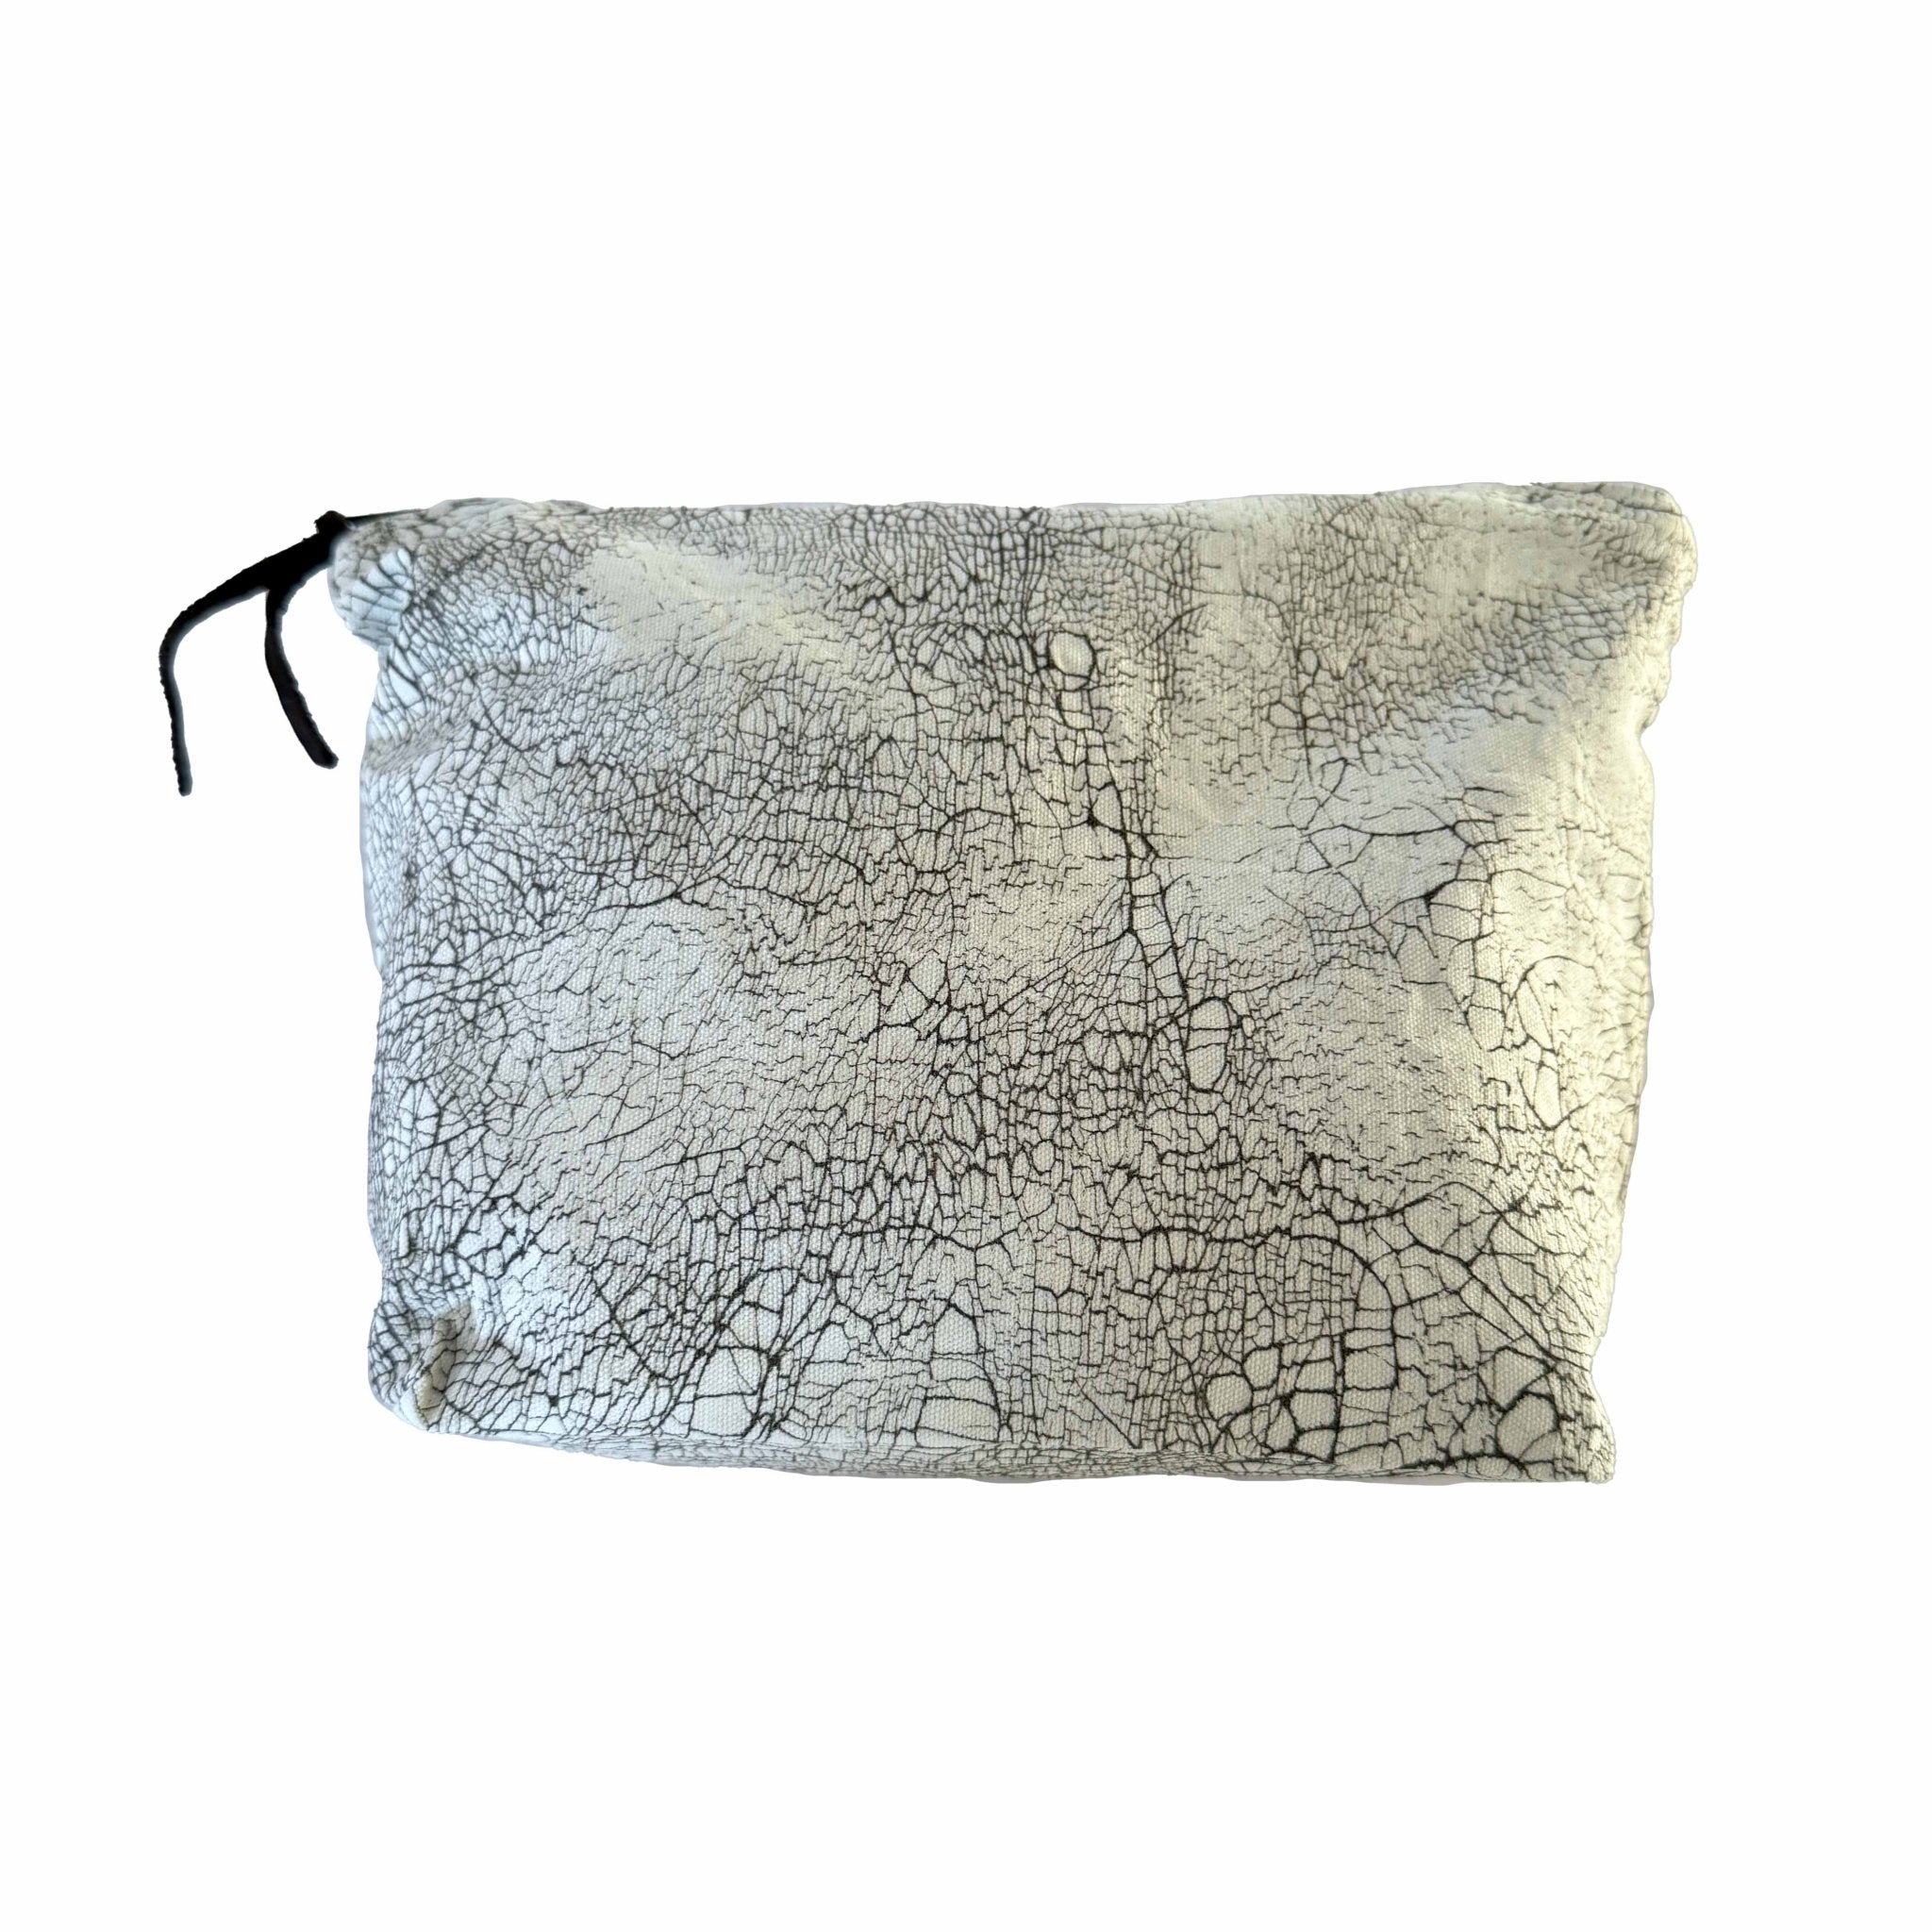 Mkupo Elephant Crackle Wash Bags - Elephant inspired white crackle wash bags, perfect for travel!